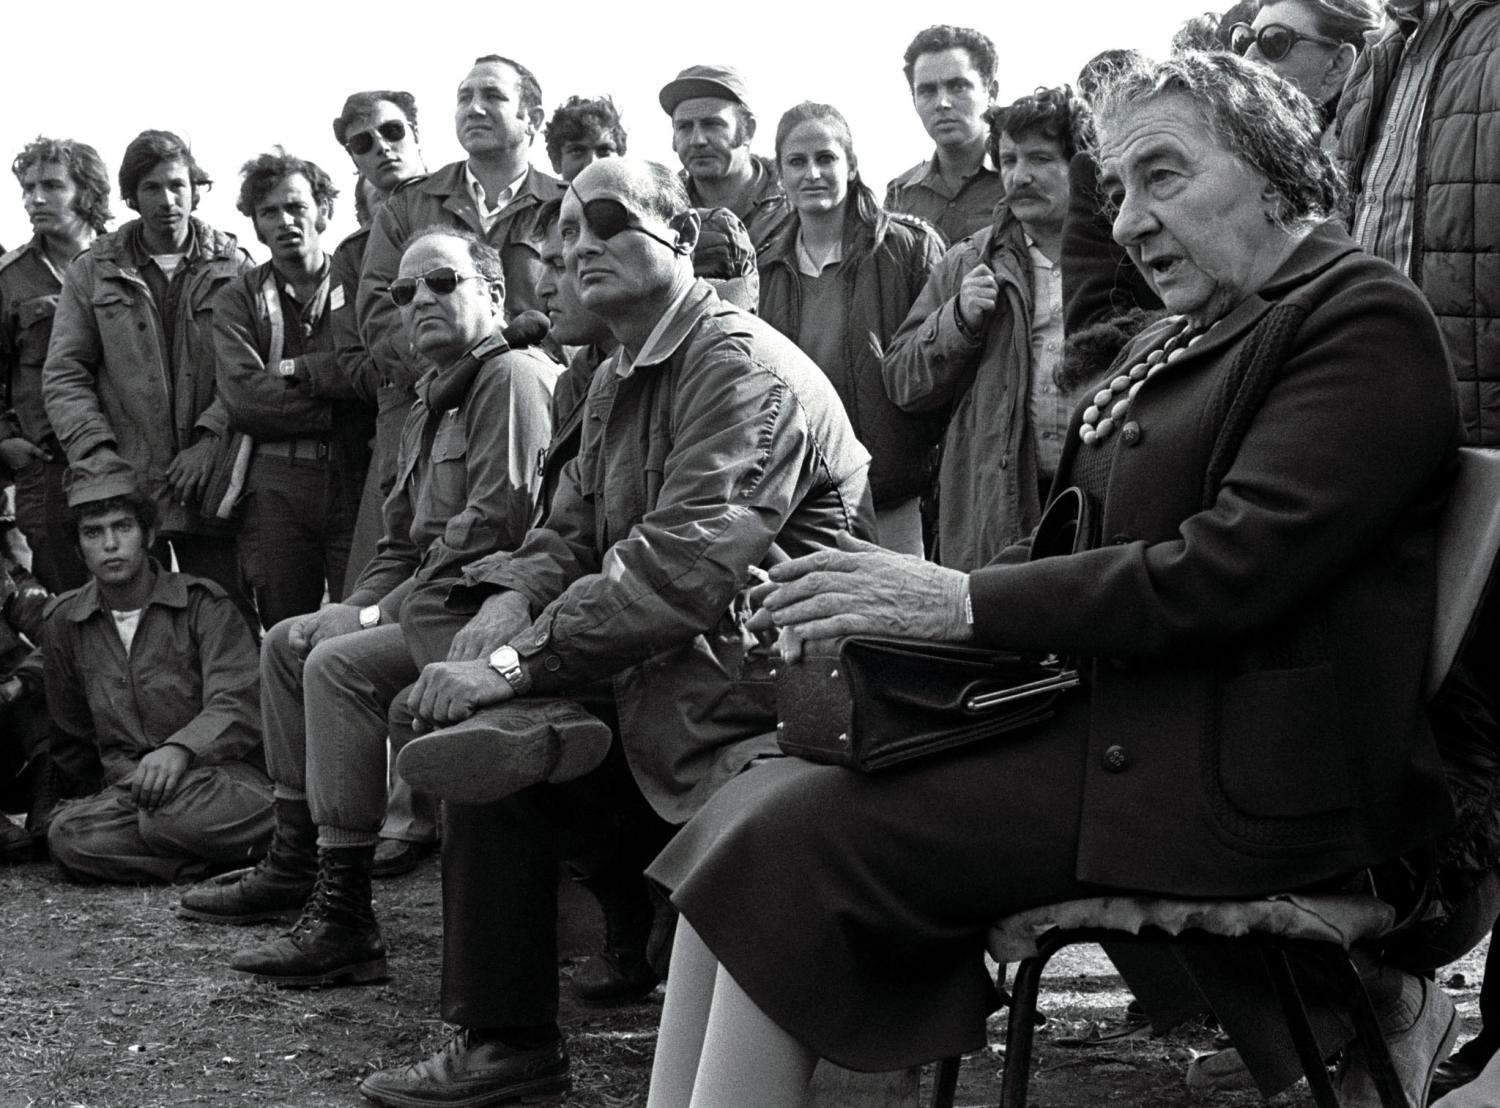 - FILE PHOTO 21NOV73 - Prime Minister Golda Meir (R) accompanied by her Defense Minister Moshe Dayan, meets with Israeli soldiers at a base on the Golan Heights after intense fighting during the 1973 Yom Kippur War.[ Israel was simultaneously attacked by Syria and Egypt on Yom Kippur, the Jewish Day of Atonement when all of Israel comes to a standstill, and was only able to defeat both countries when the United States provided an emergency major resupply of equipment. Israel suffered heavy causalities and many Israelis were angered at the country's unpreparedness. ] Israel celebrates its 50th Golden Jubilee anniversary on April 30, according to the Hebrew calendar. - RTXIE3D